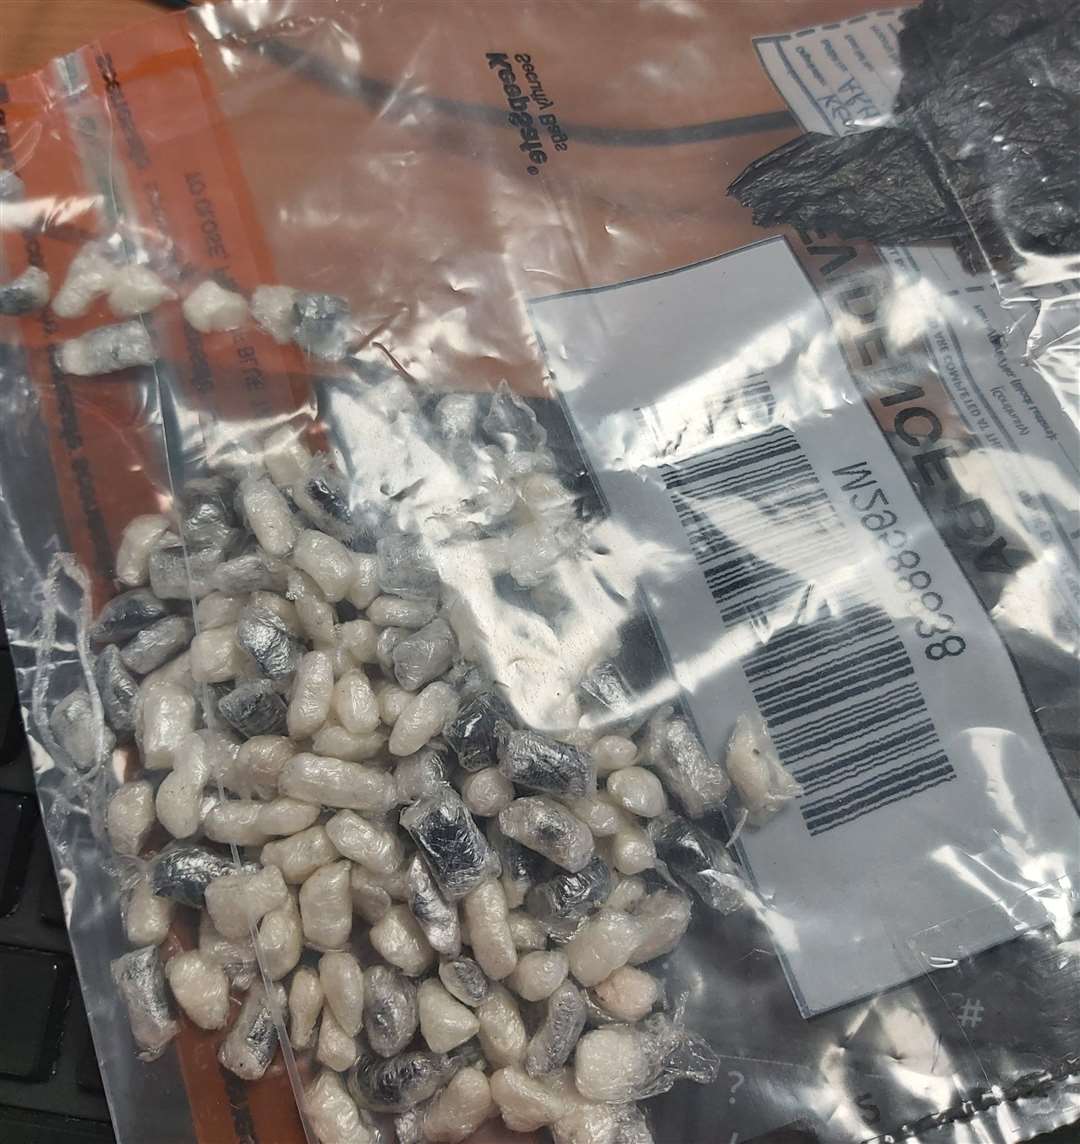 Suspected class A drugs were found. Picture: Kent Police